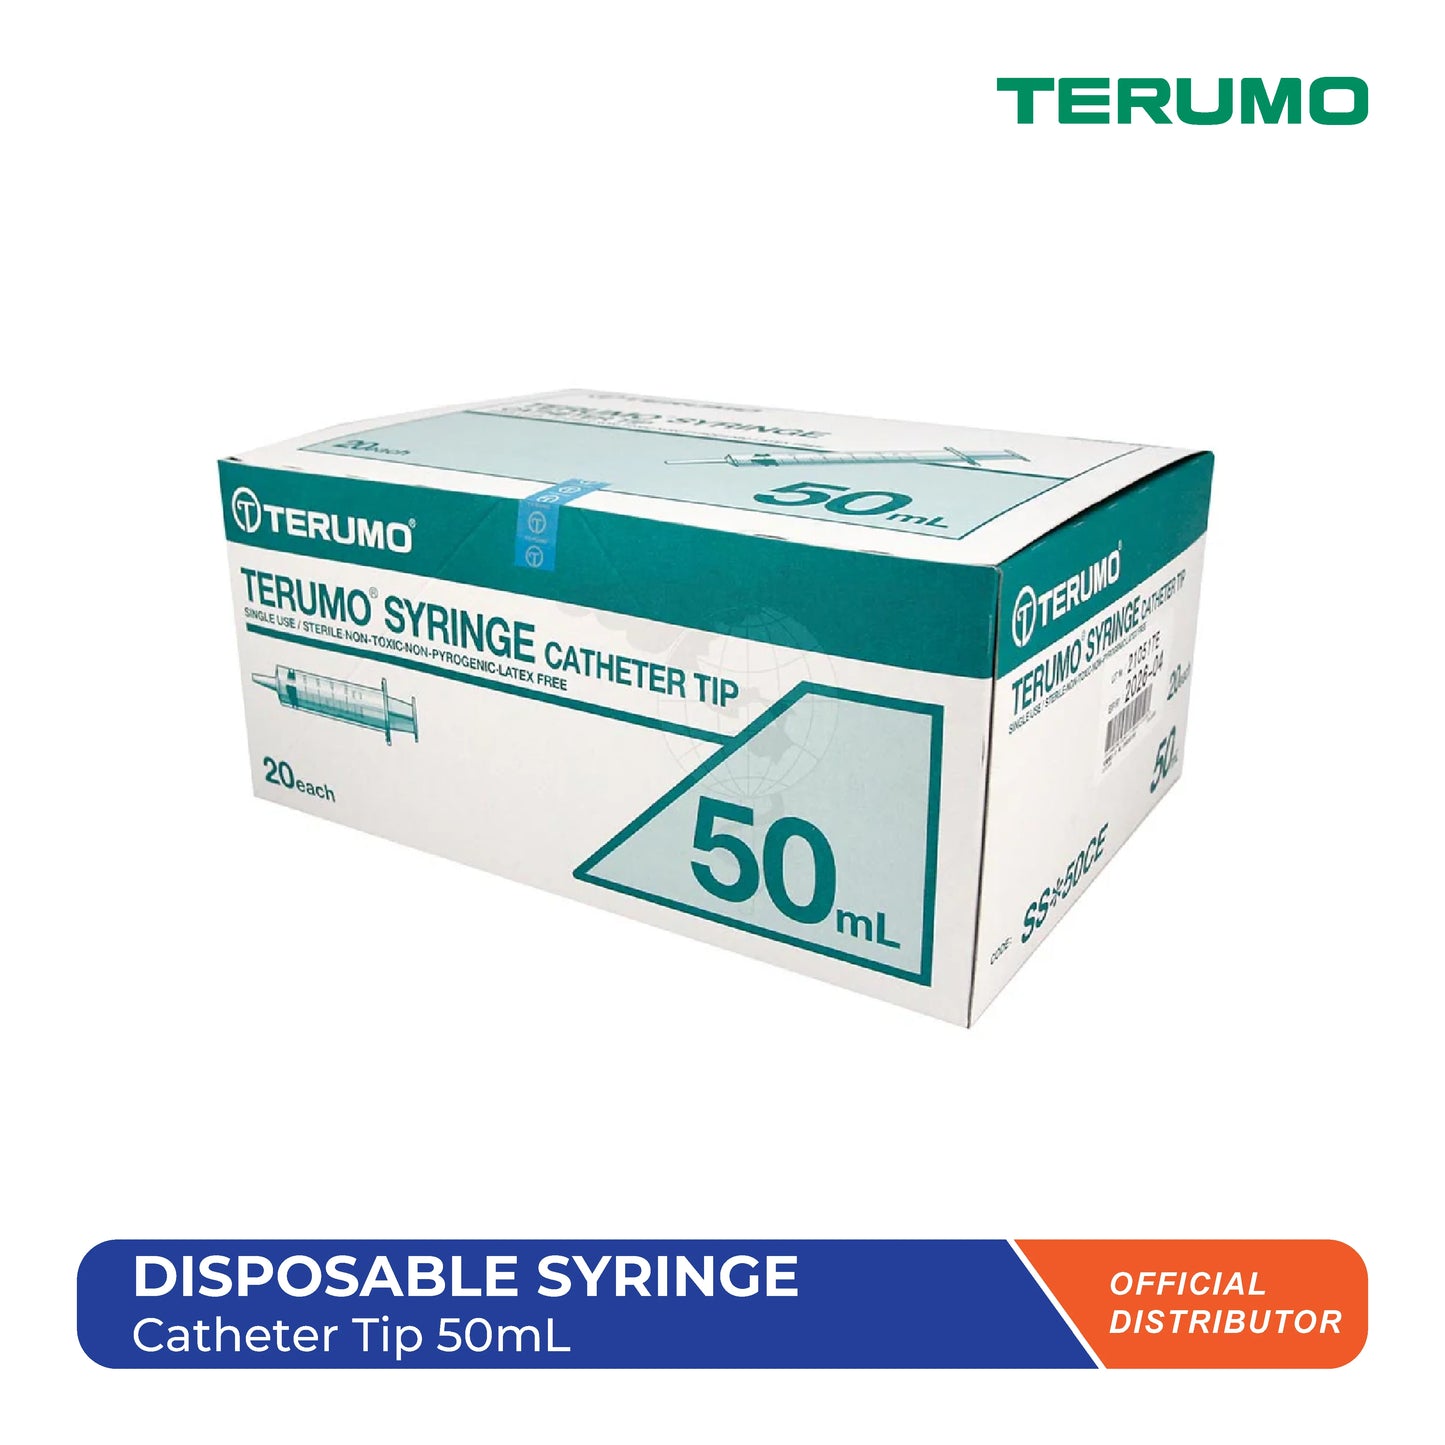 Disposable Syringe Cathether Tip 50ml